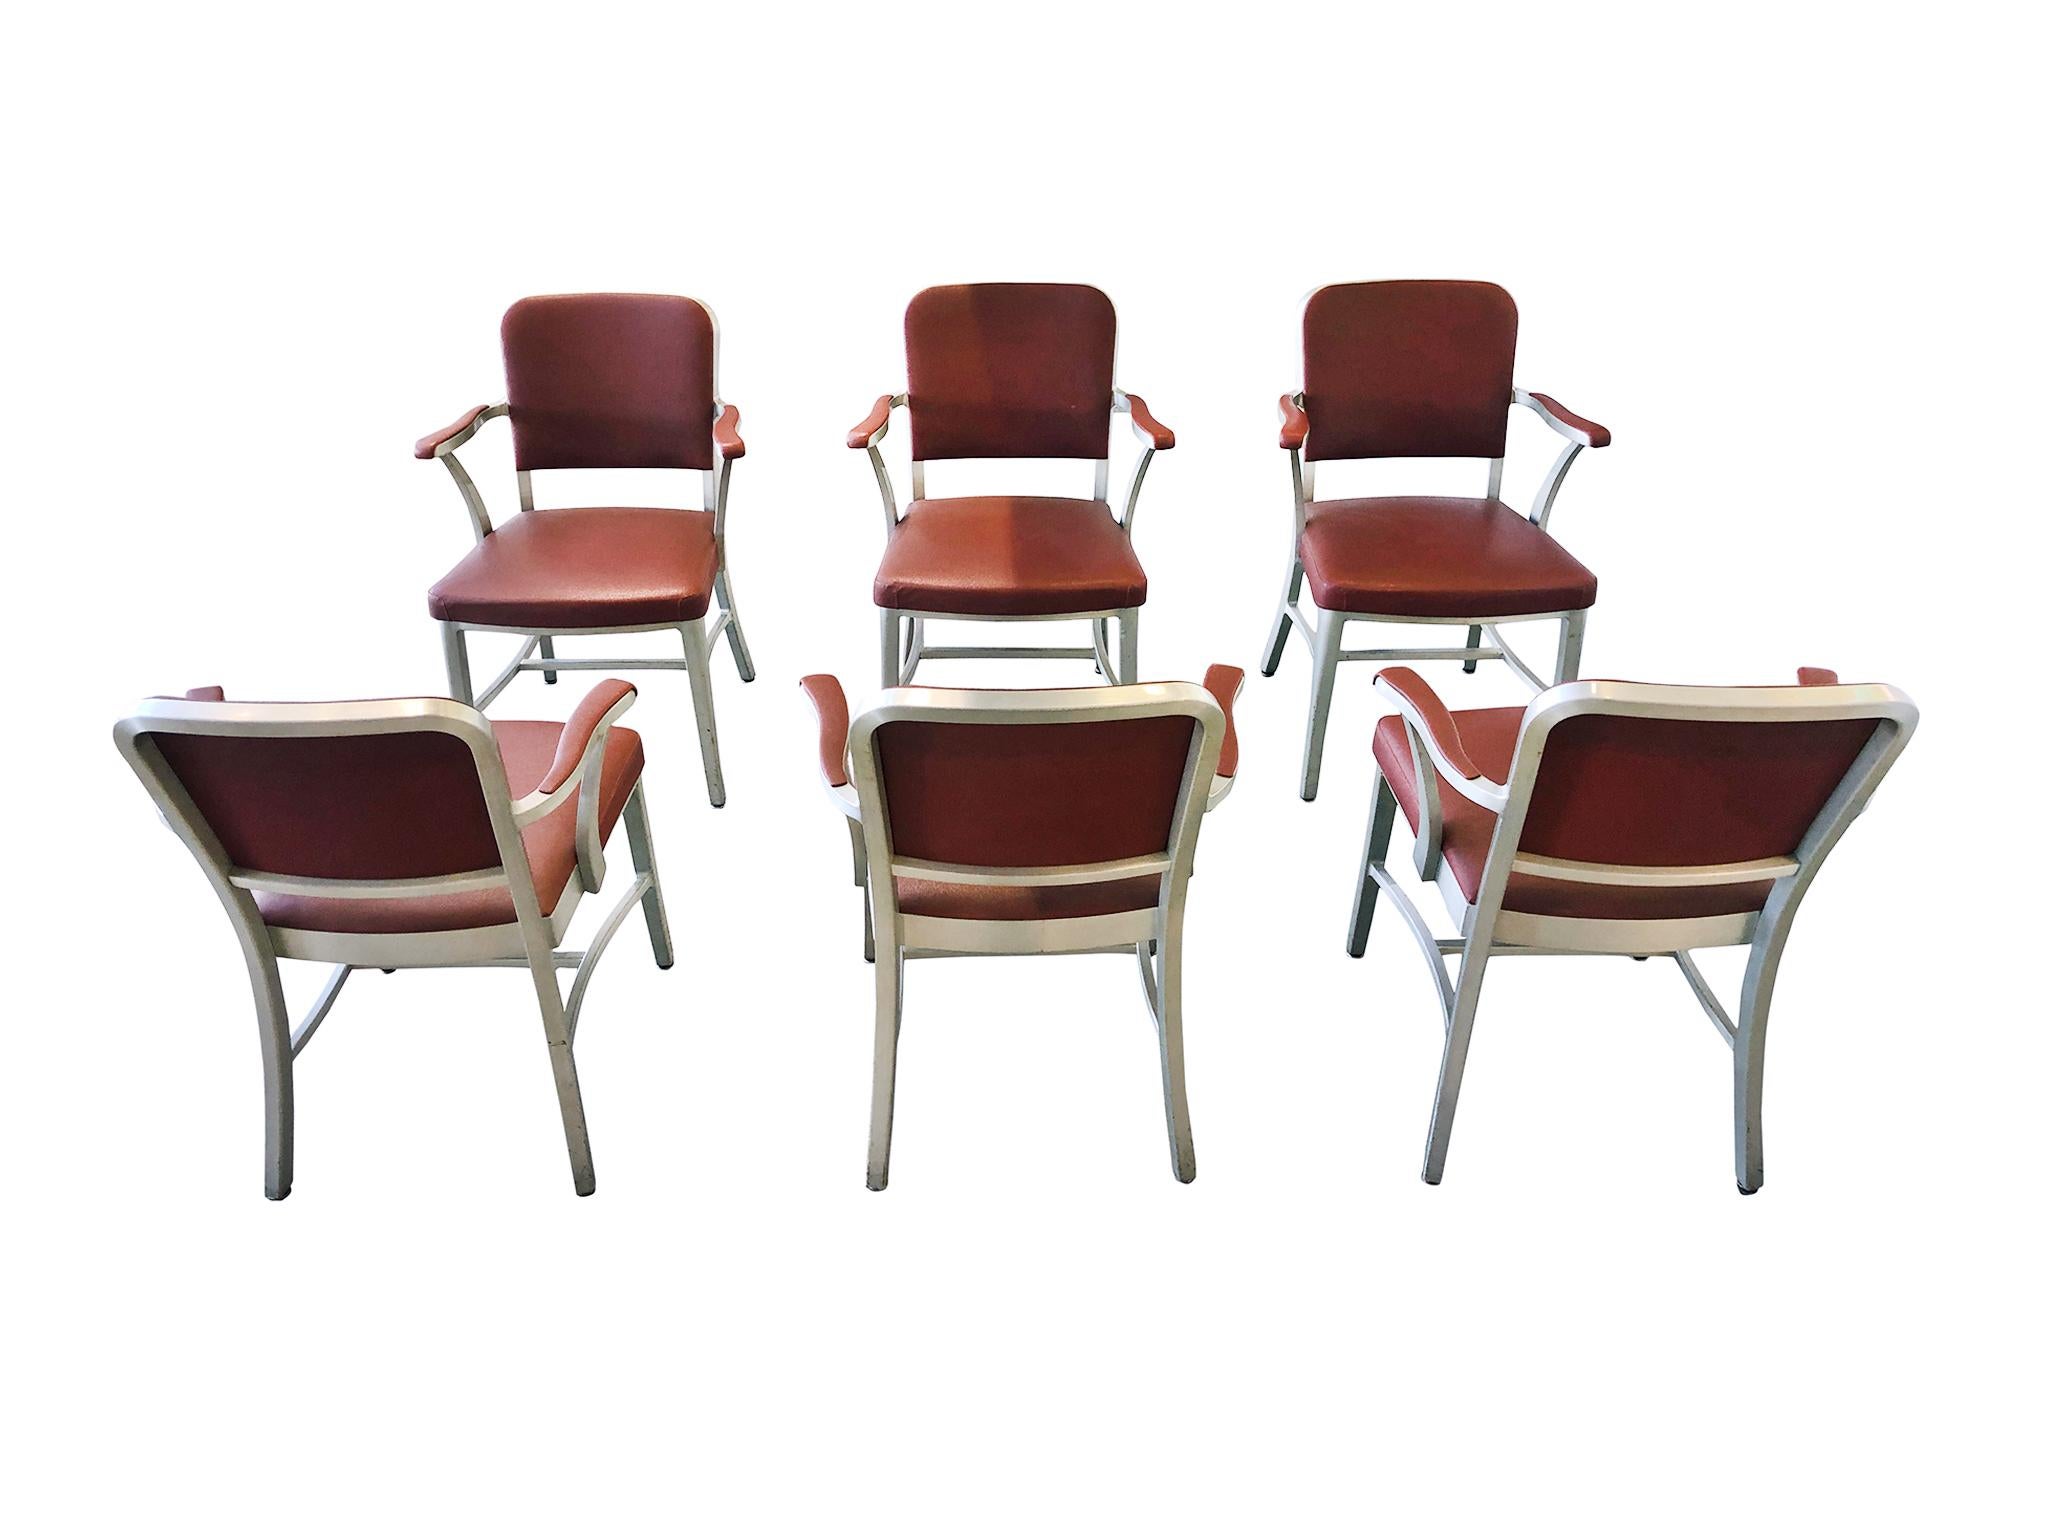 20th Century Set of 6 GoodForm Aluminum Armchairs by the General Fireproofing Co.